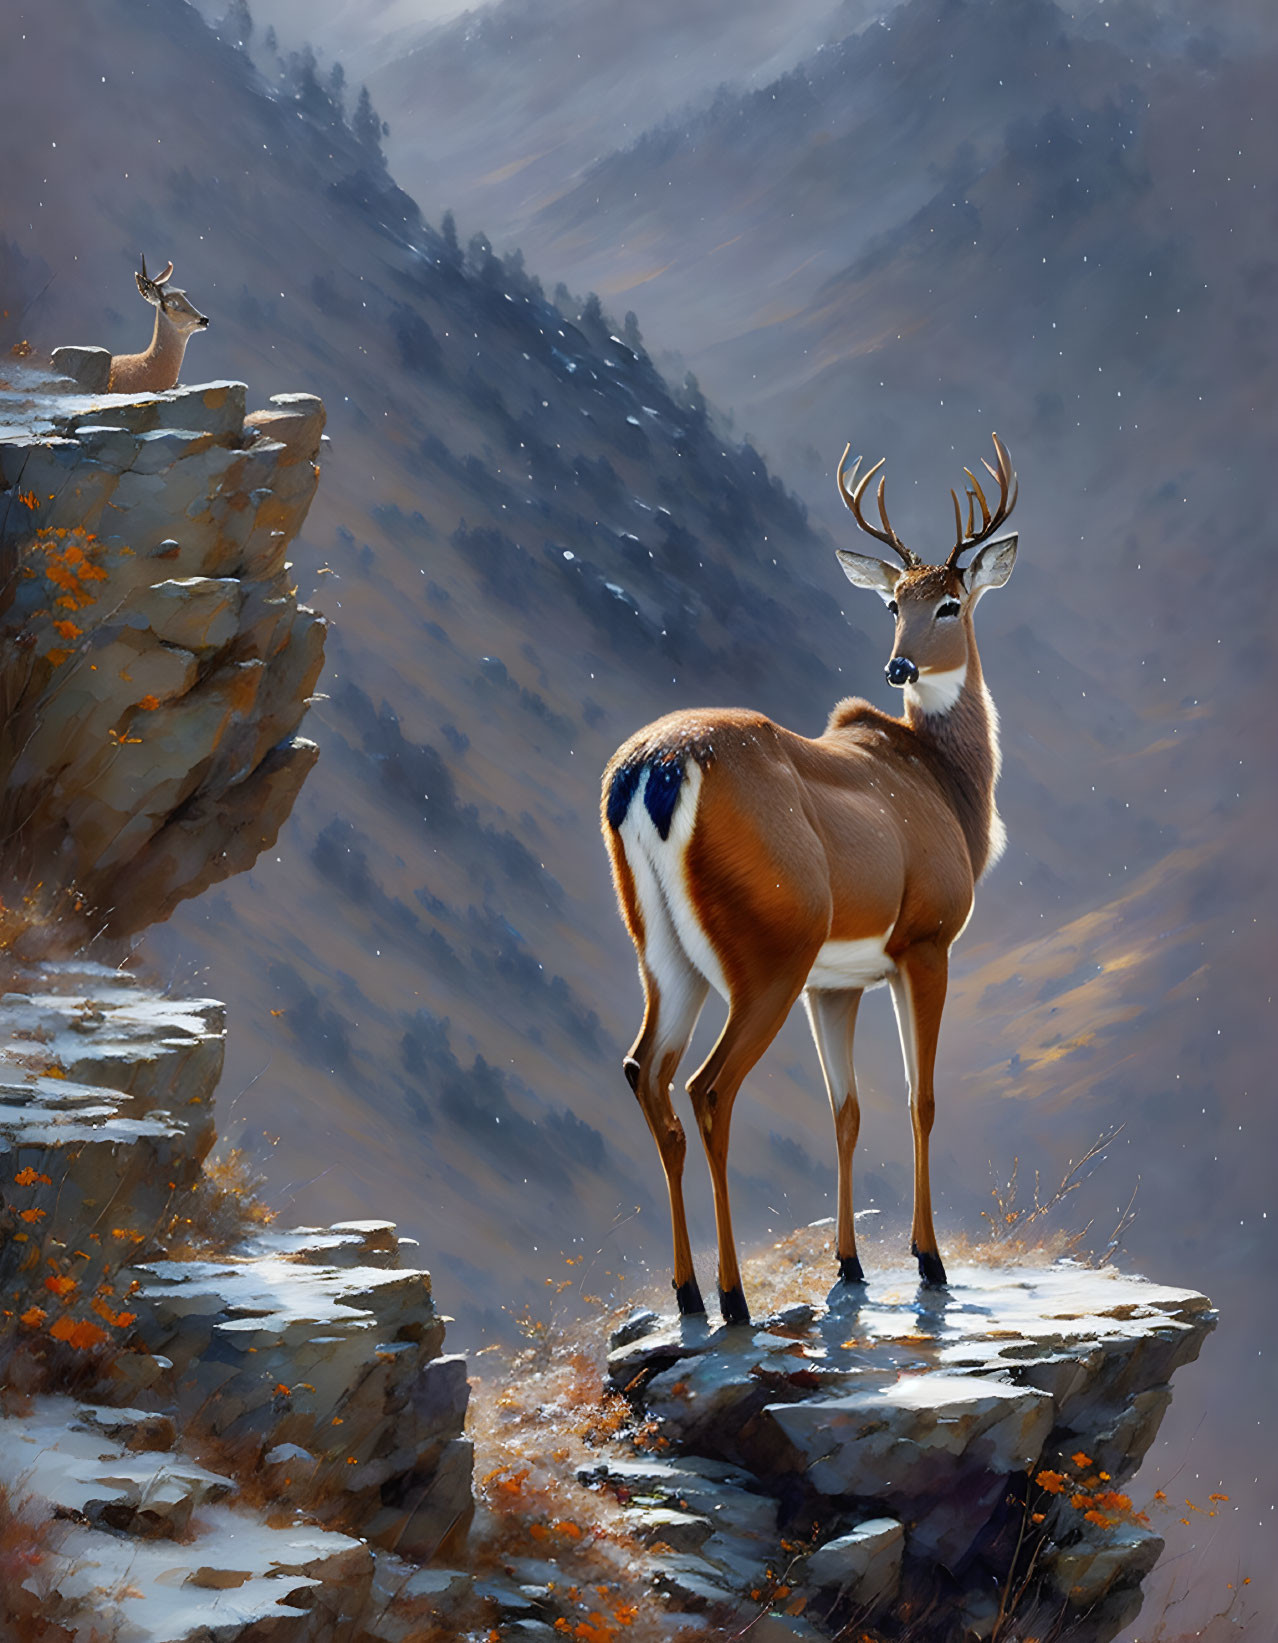 A deer on top of a cliff